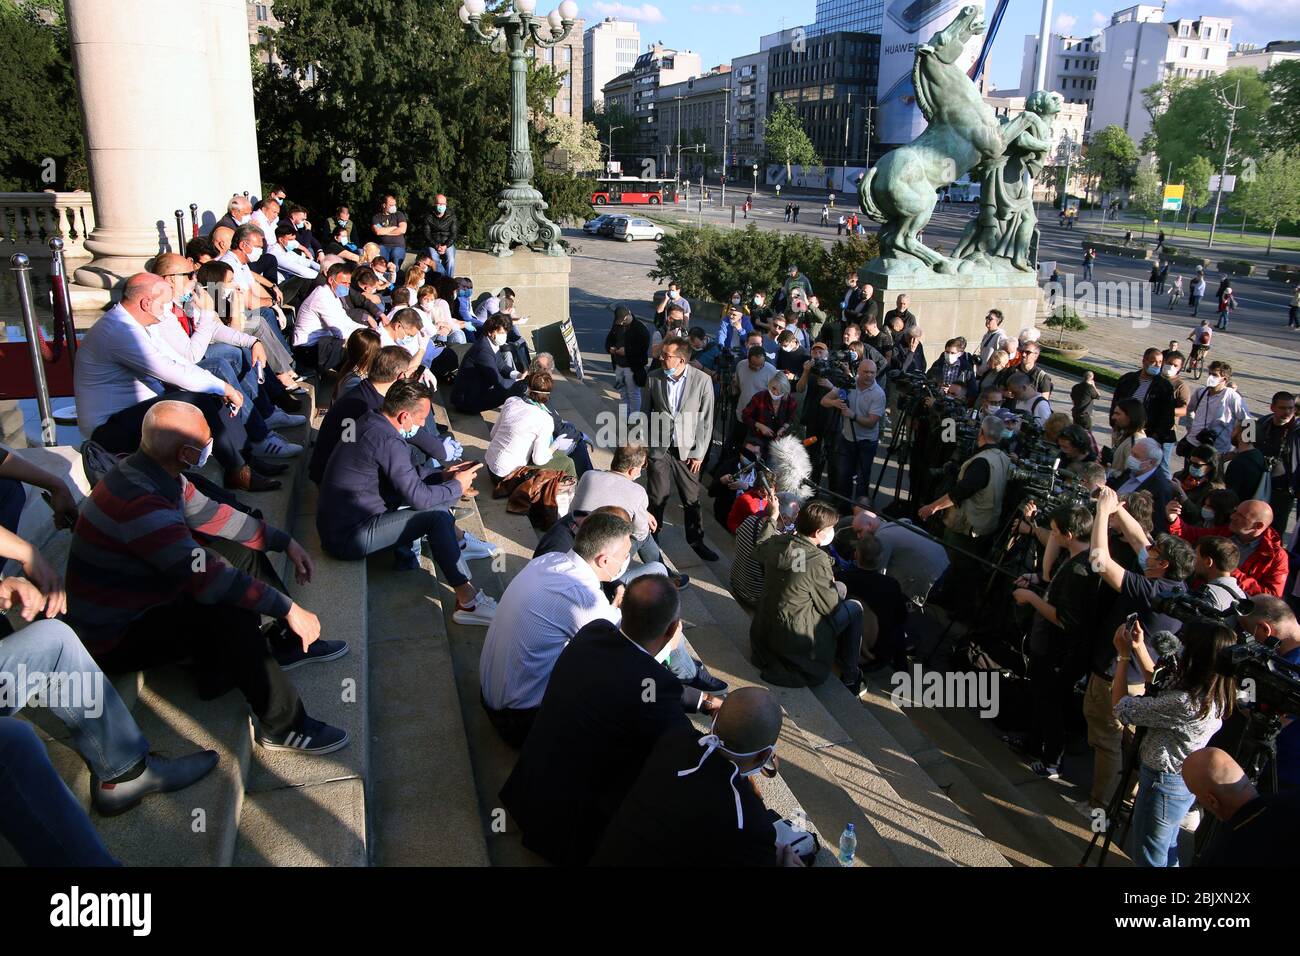 Belgrade, Serbia. 30th Apr 2020. Serbian opposition members wearing protective face masks sit in front of the House of Parliament during the protest, amid the ongoing coronavirus COVID-19 pandemic. Serbian opposition and members of Alliance for Serbia protested in front of the parliament building against government policies to stem the spread of the pandemic COVID-19 disease caused by the SARS-CoV-2 coronavirus. Credit: Koca Sulejmanovic/Alamy Live News Stock Photo